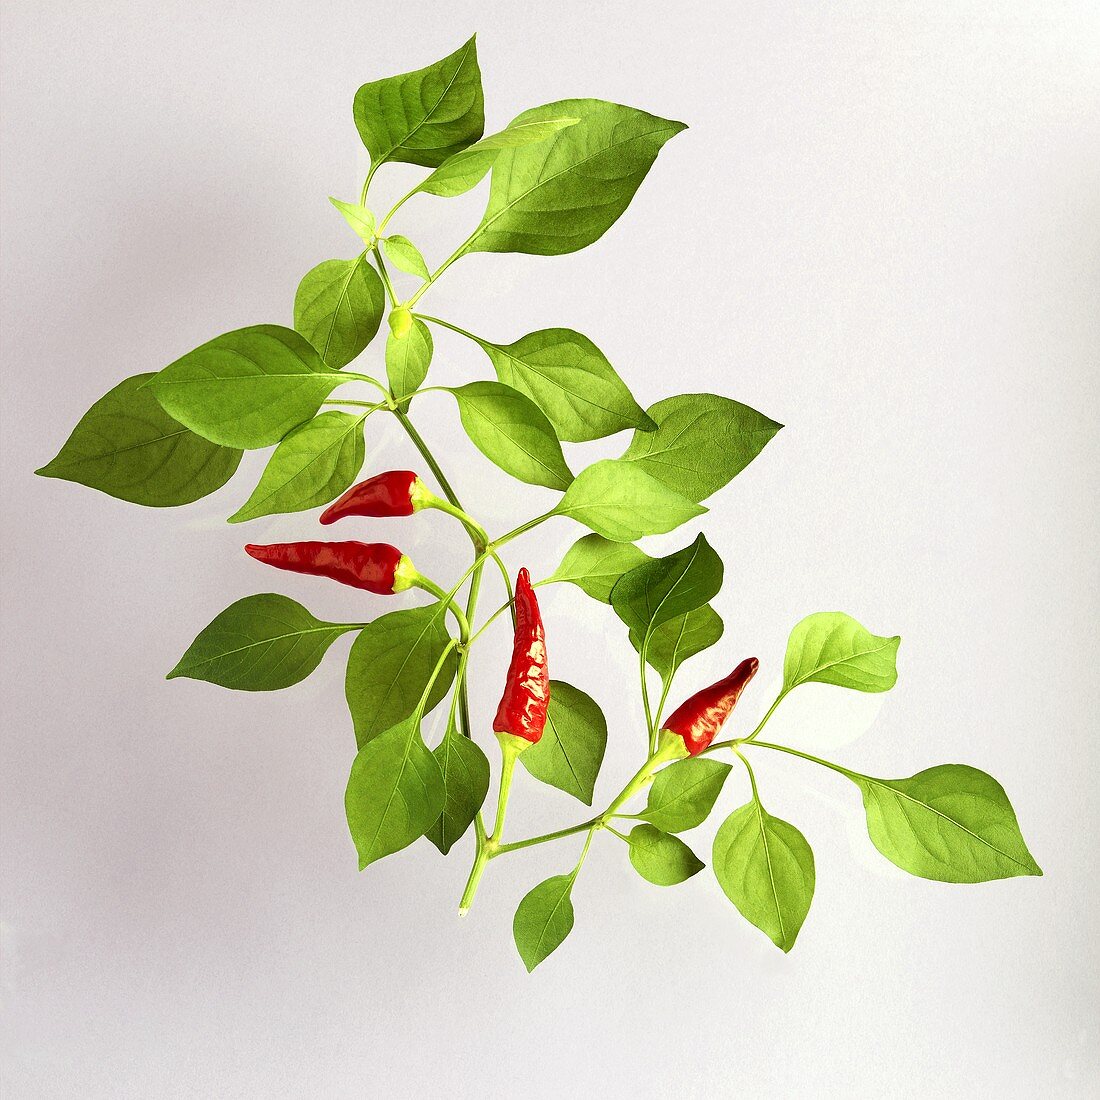 Red chillies on branch of chilli plant